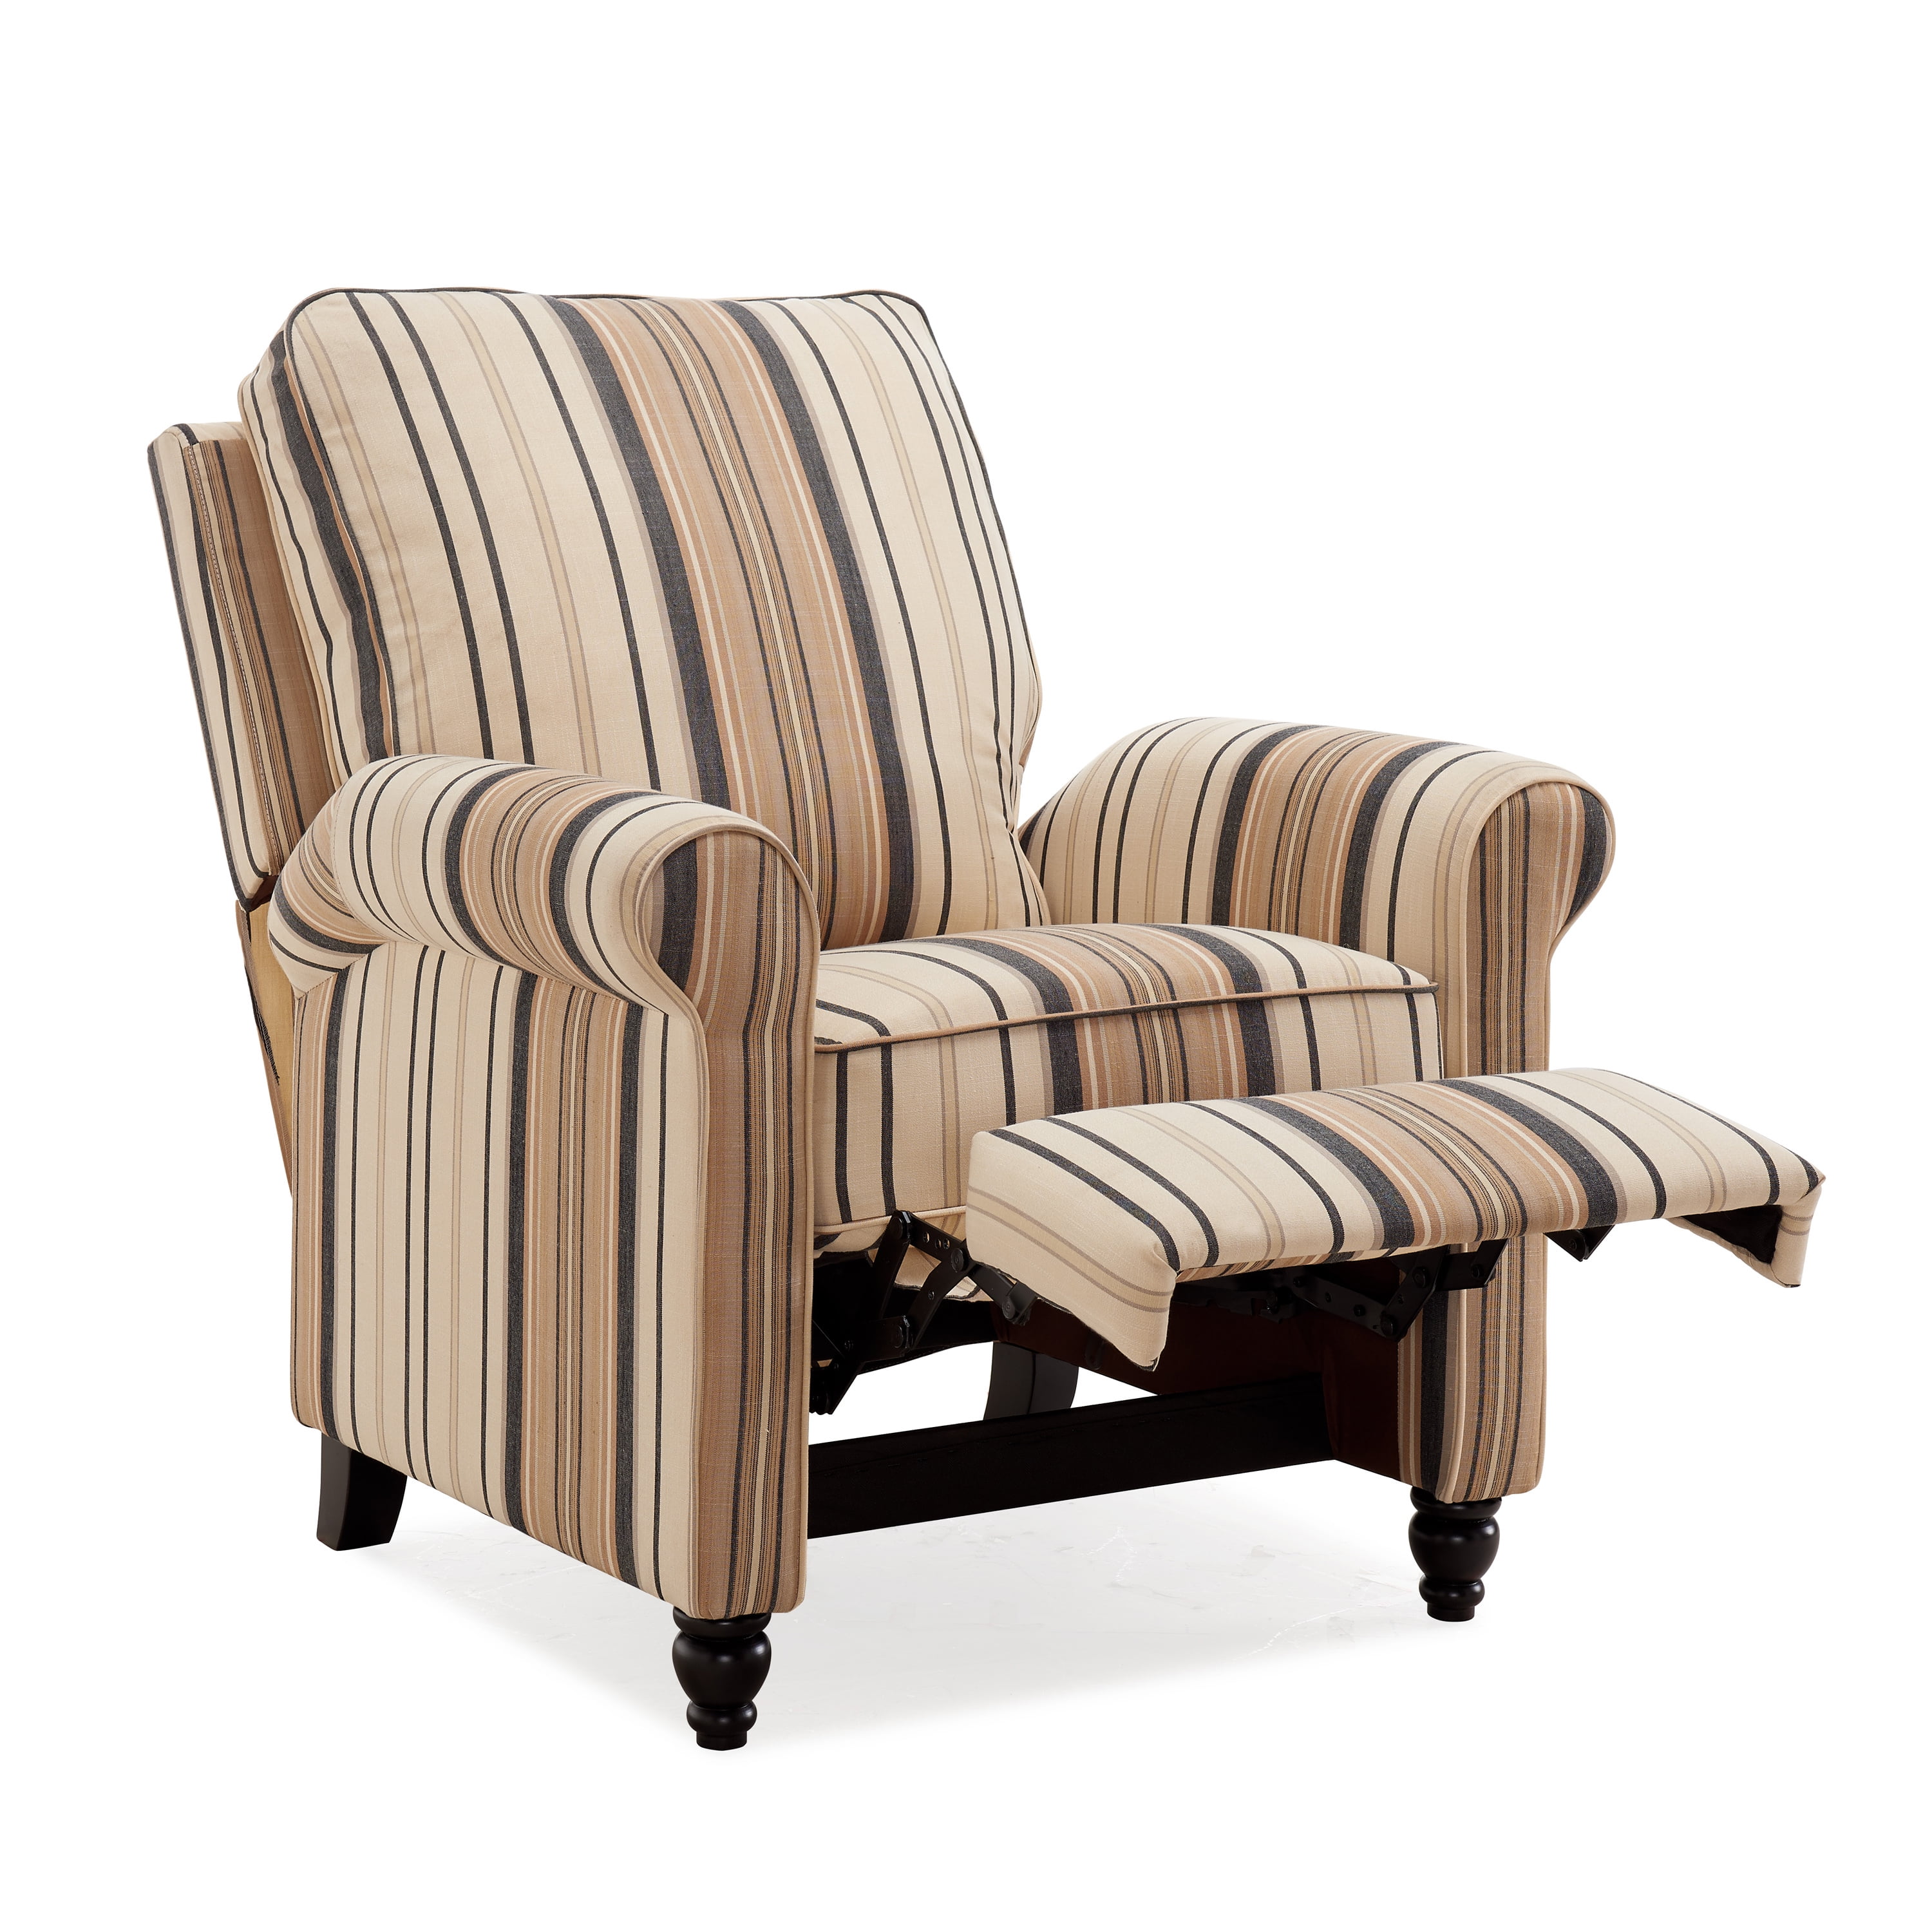 Homesvale Lincoln Push Back Recliner Chair, Brown and